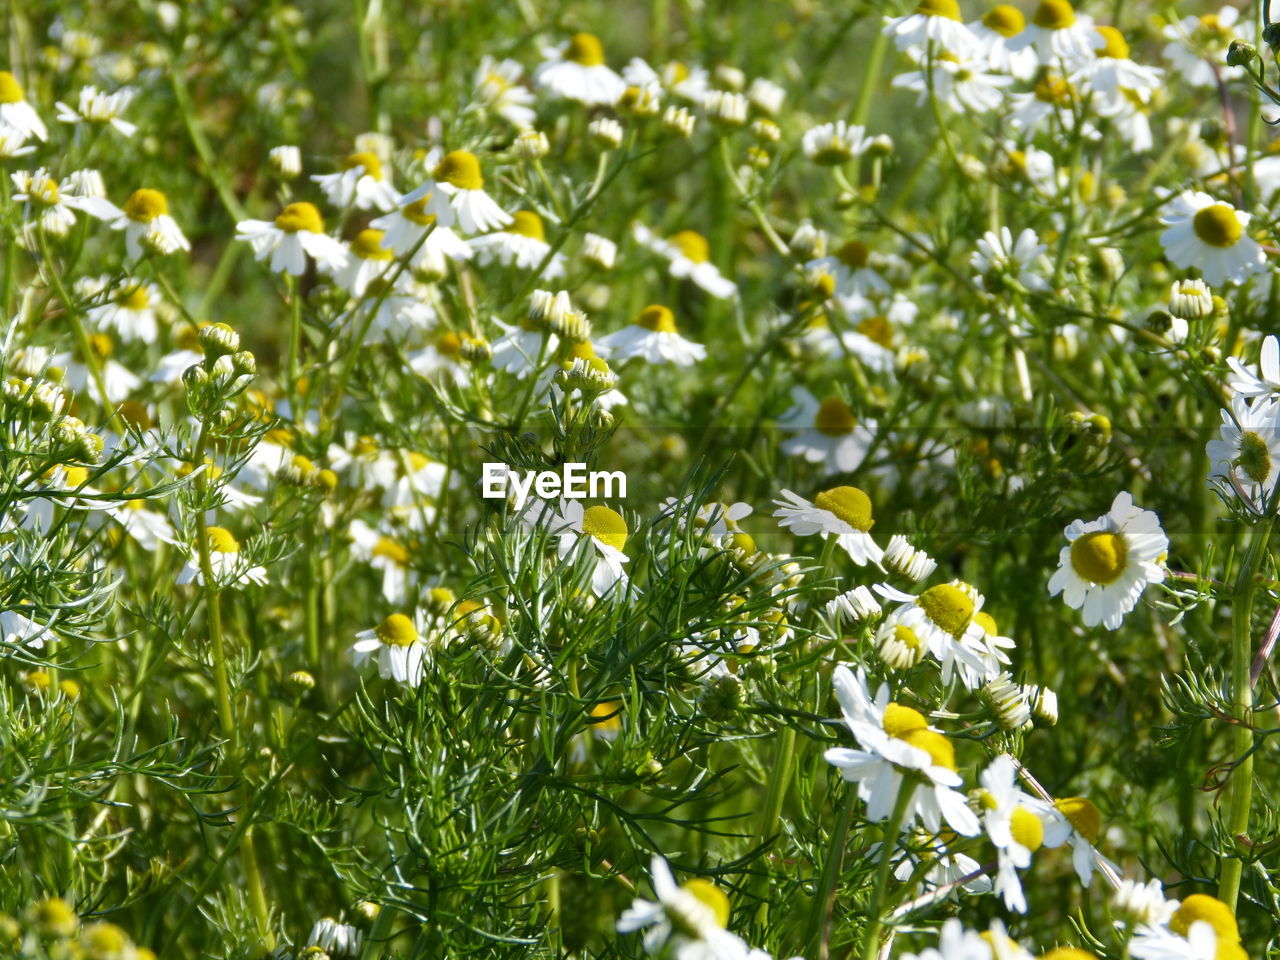 CLOSE-UP OF FLOWERING PLANTS ON FIELD